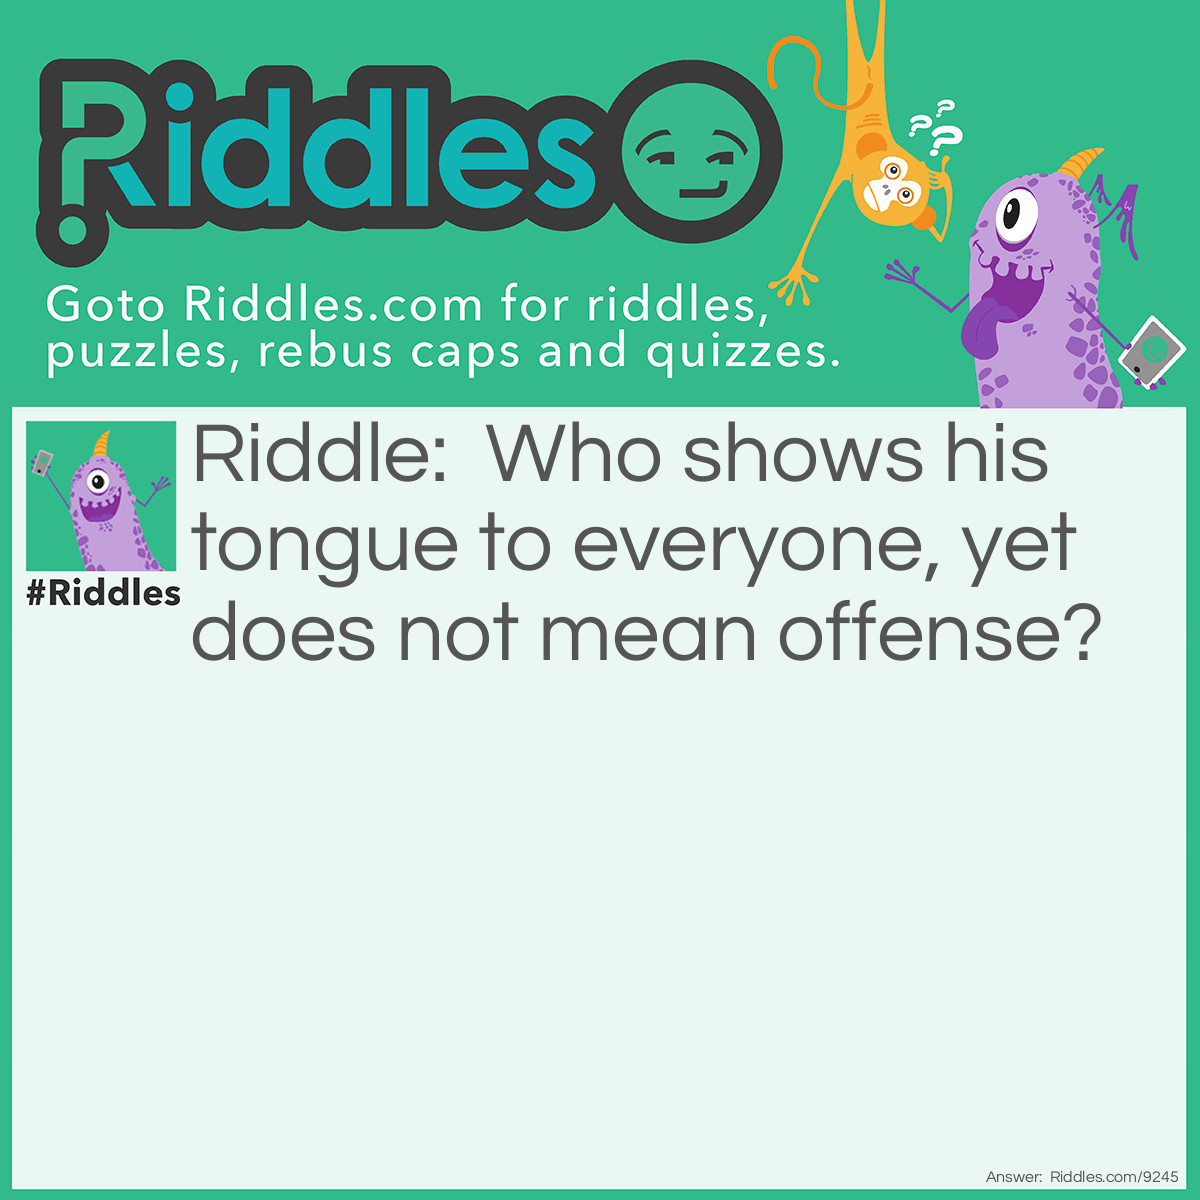 Riddle: Who shows his tongue to everyone, yet does not mean offense? Answer: A dog.